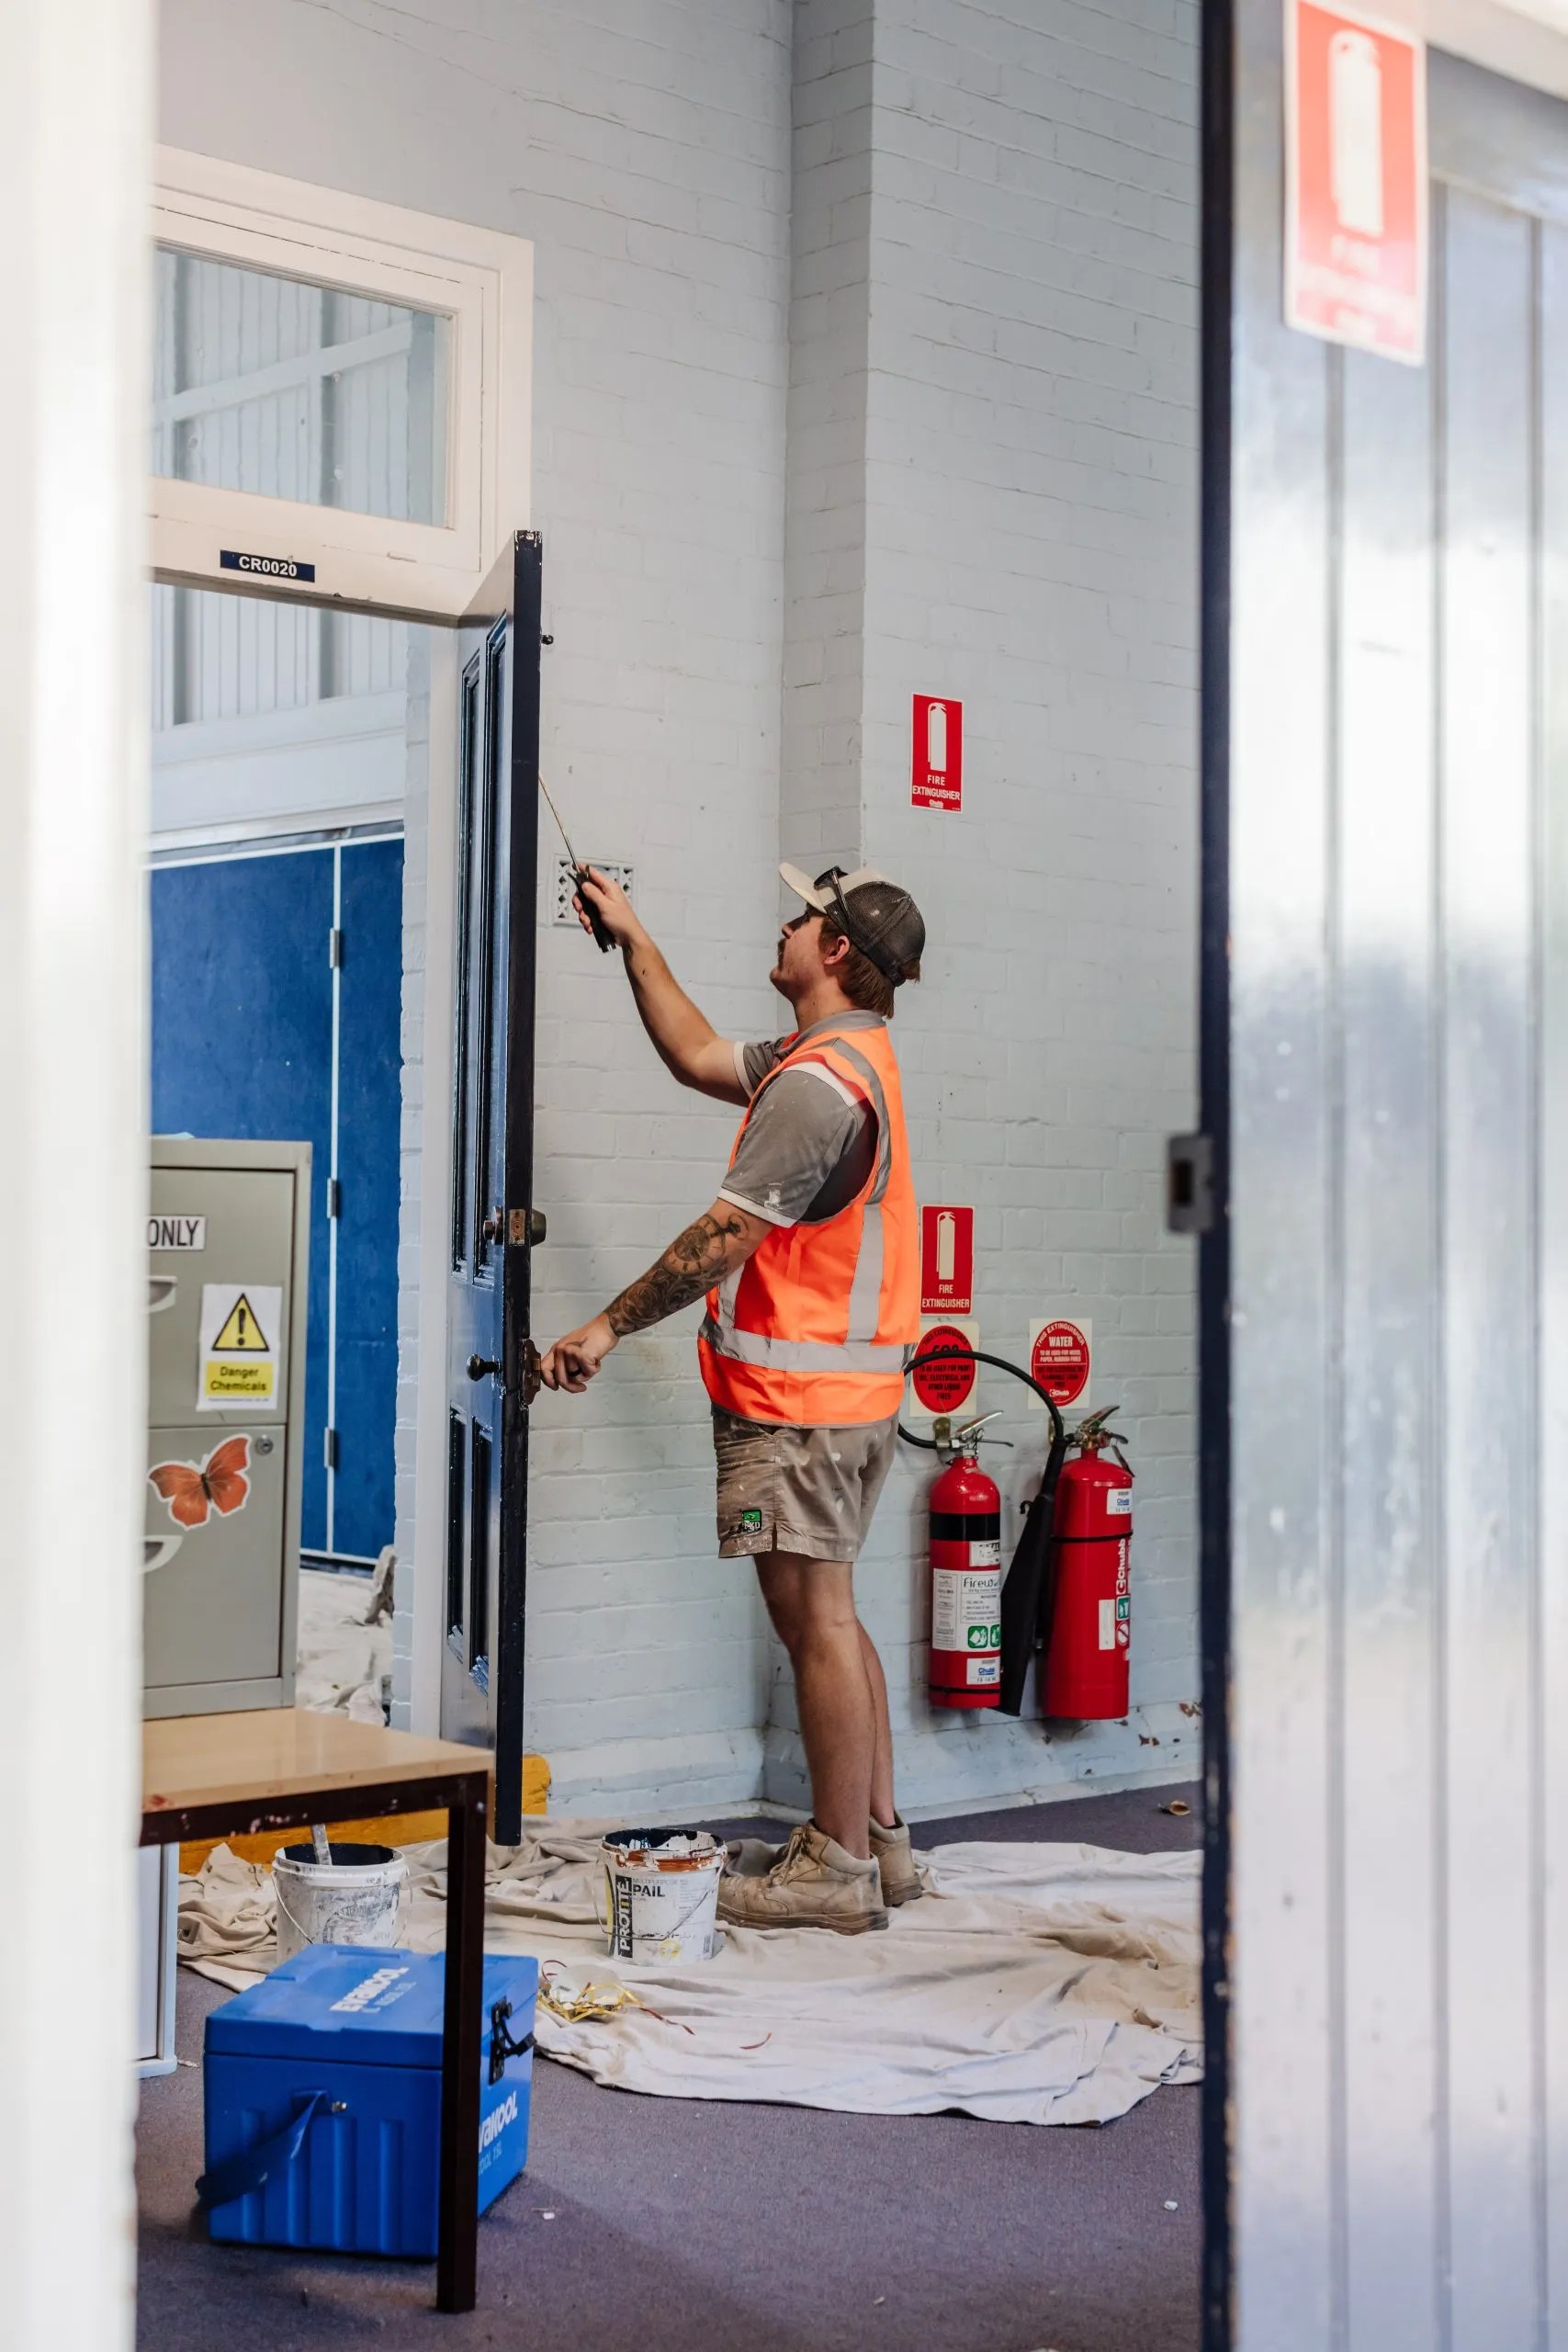 A man is painting a door in a school building.